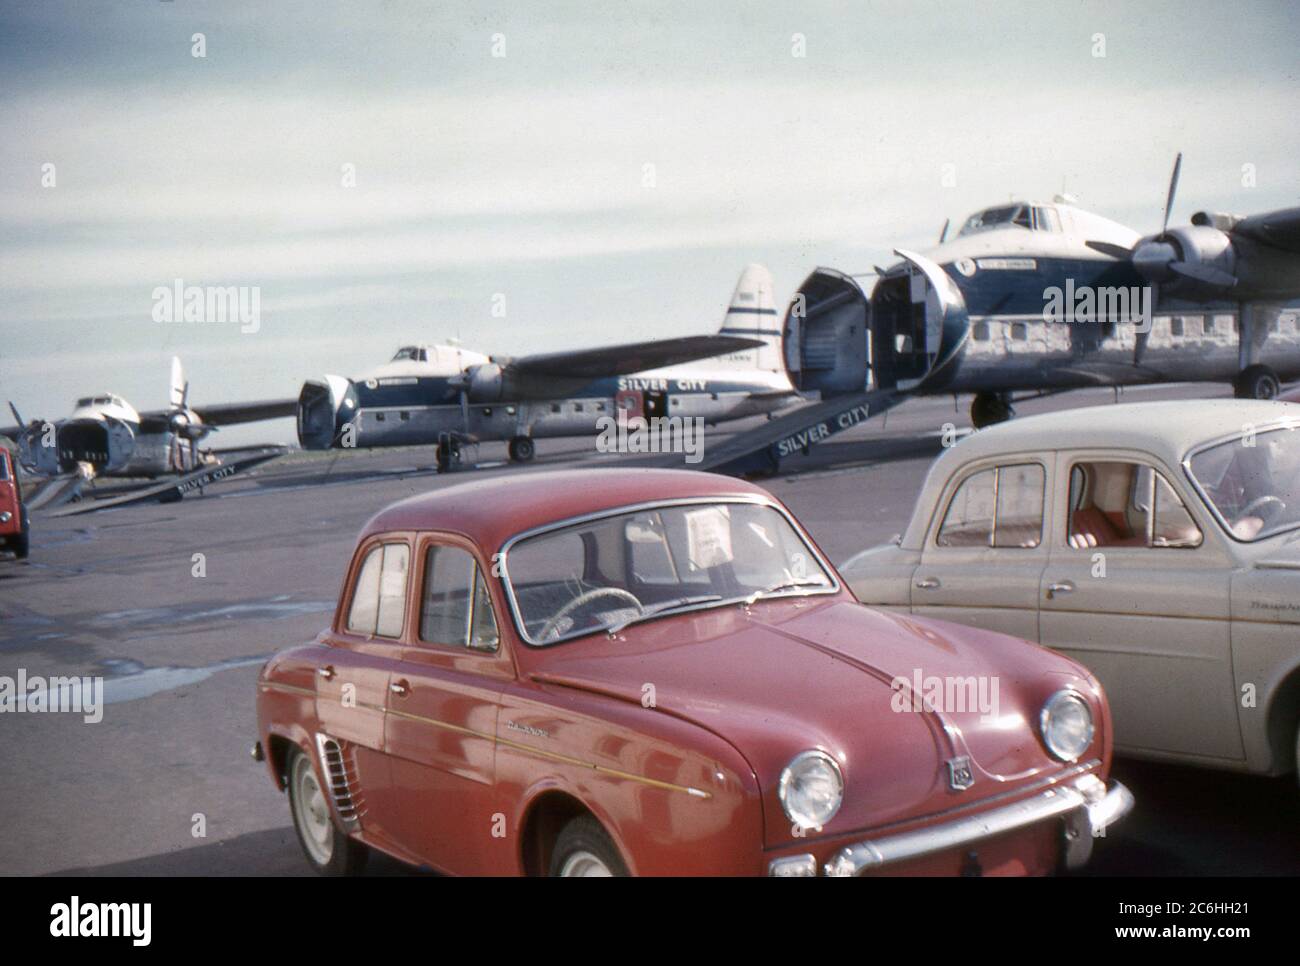 1960. Three Bristol Freighter aircraft of Silver City Airways. Their cargo doors are open and ramps down. Two period motor cars are parked in the foreground, waiting to board the aircraft. Stock Photo